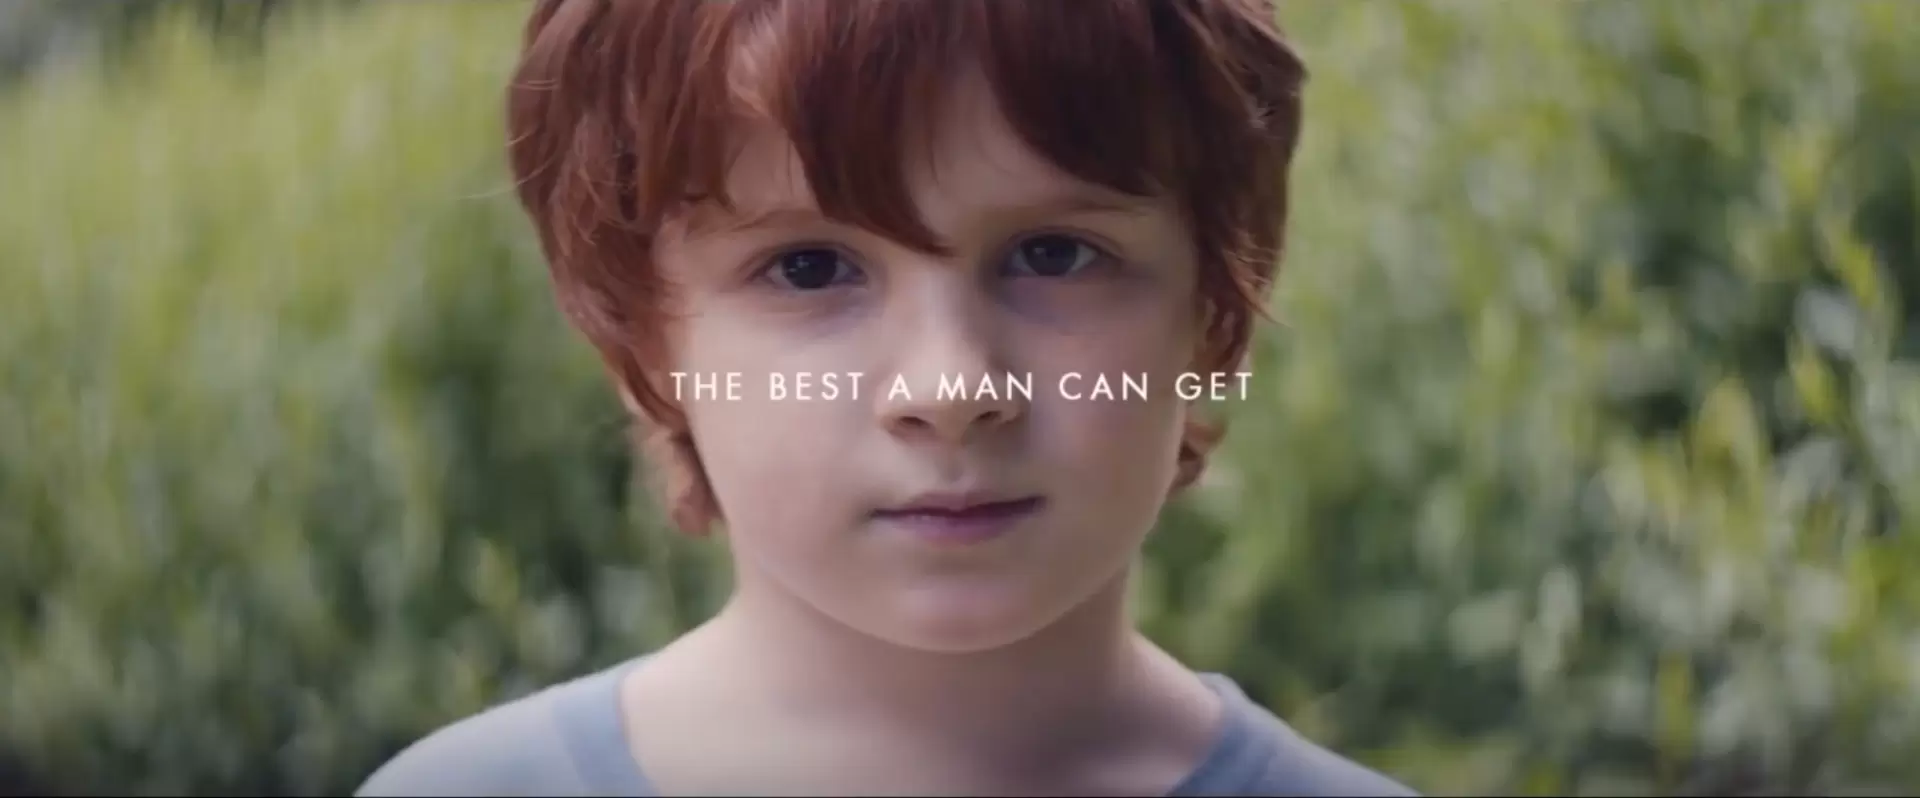 smooth child's face used in creative advertising by Gilette